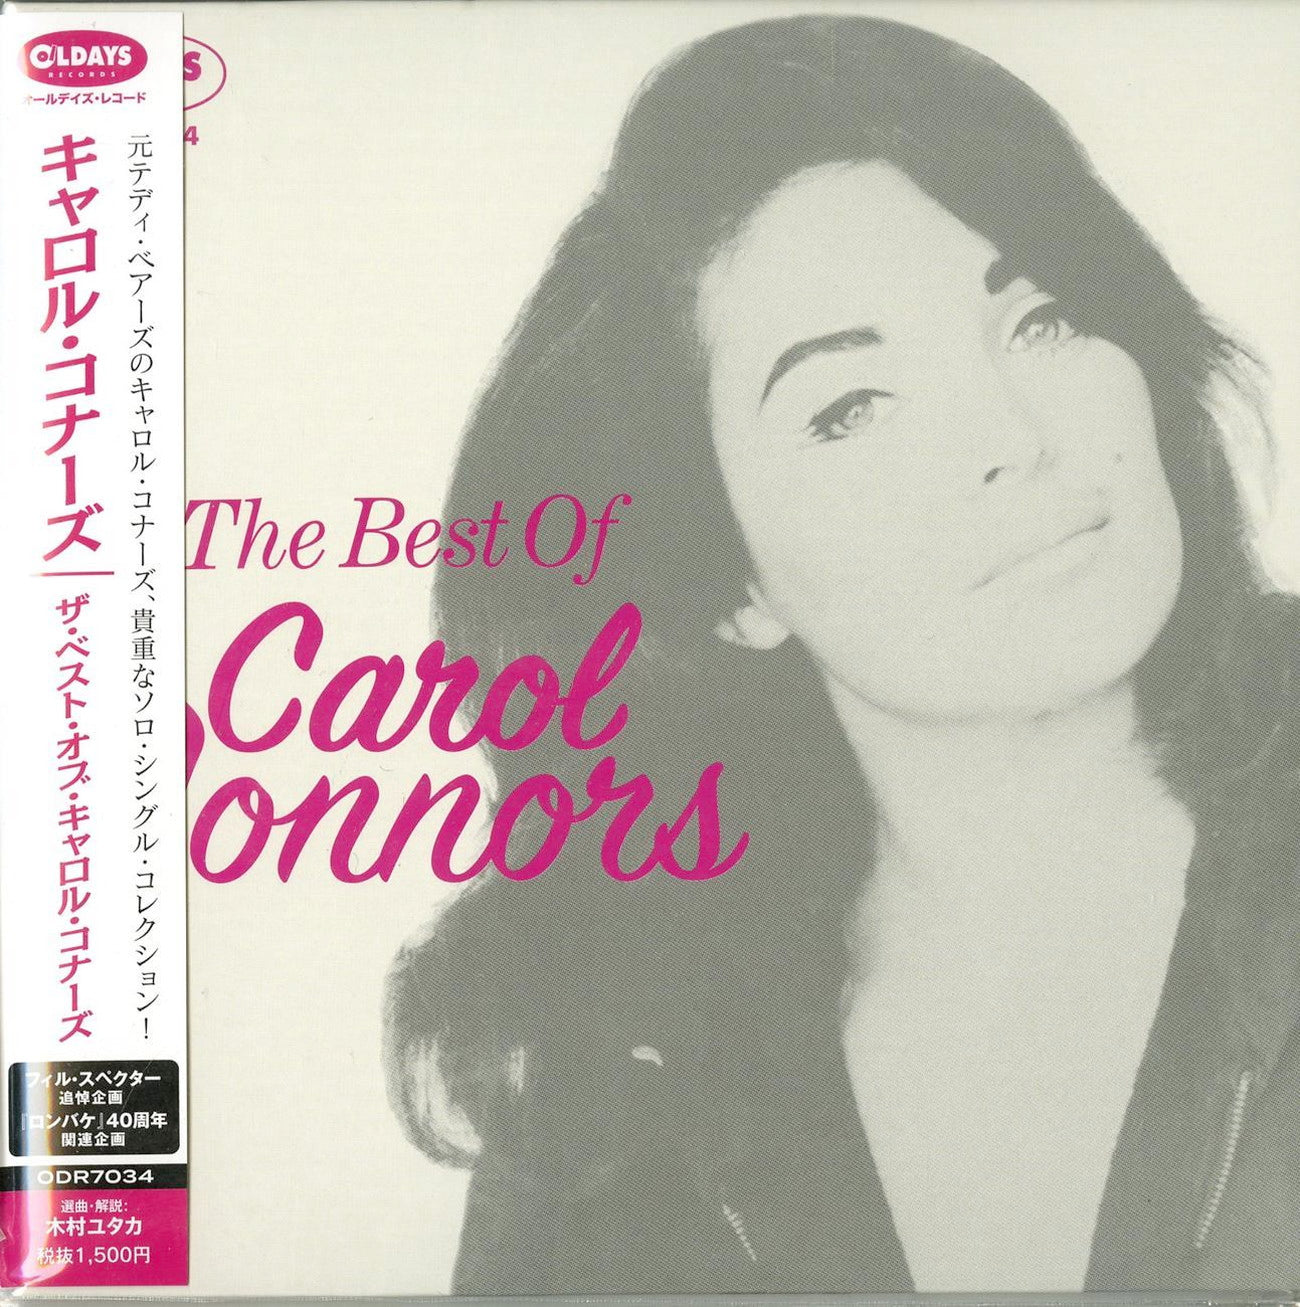 Carol Connors - The Best of Carol Connors - Mini LP CD